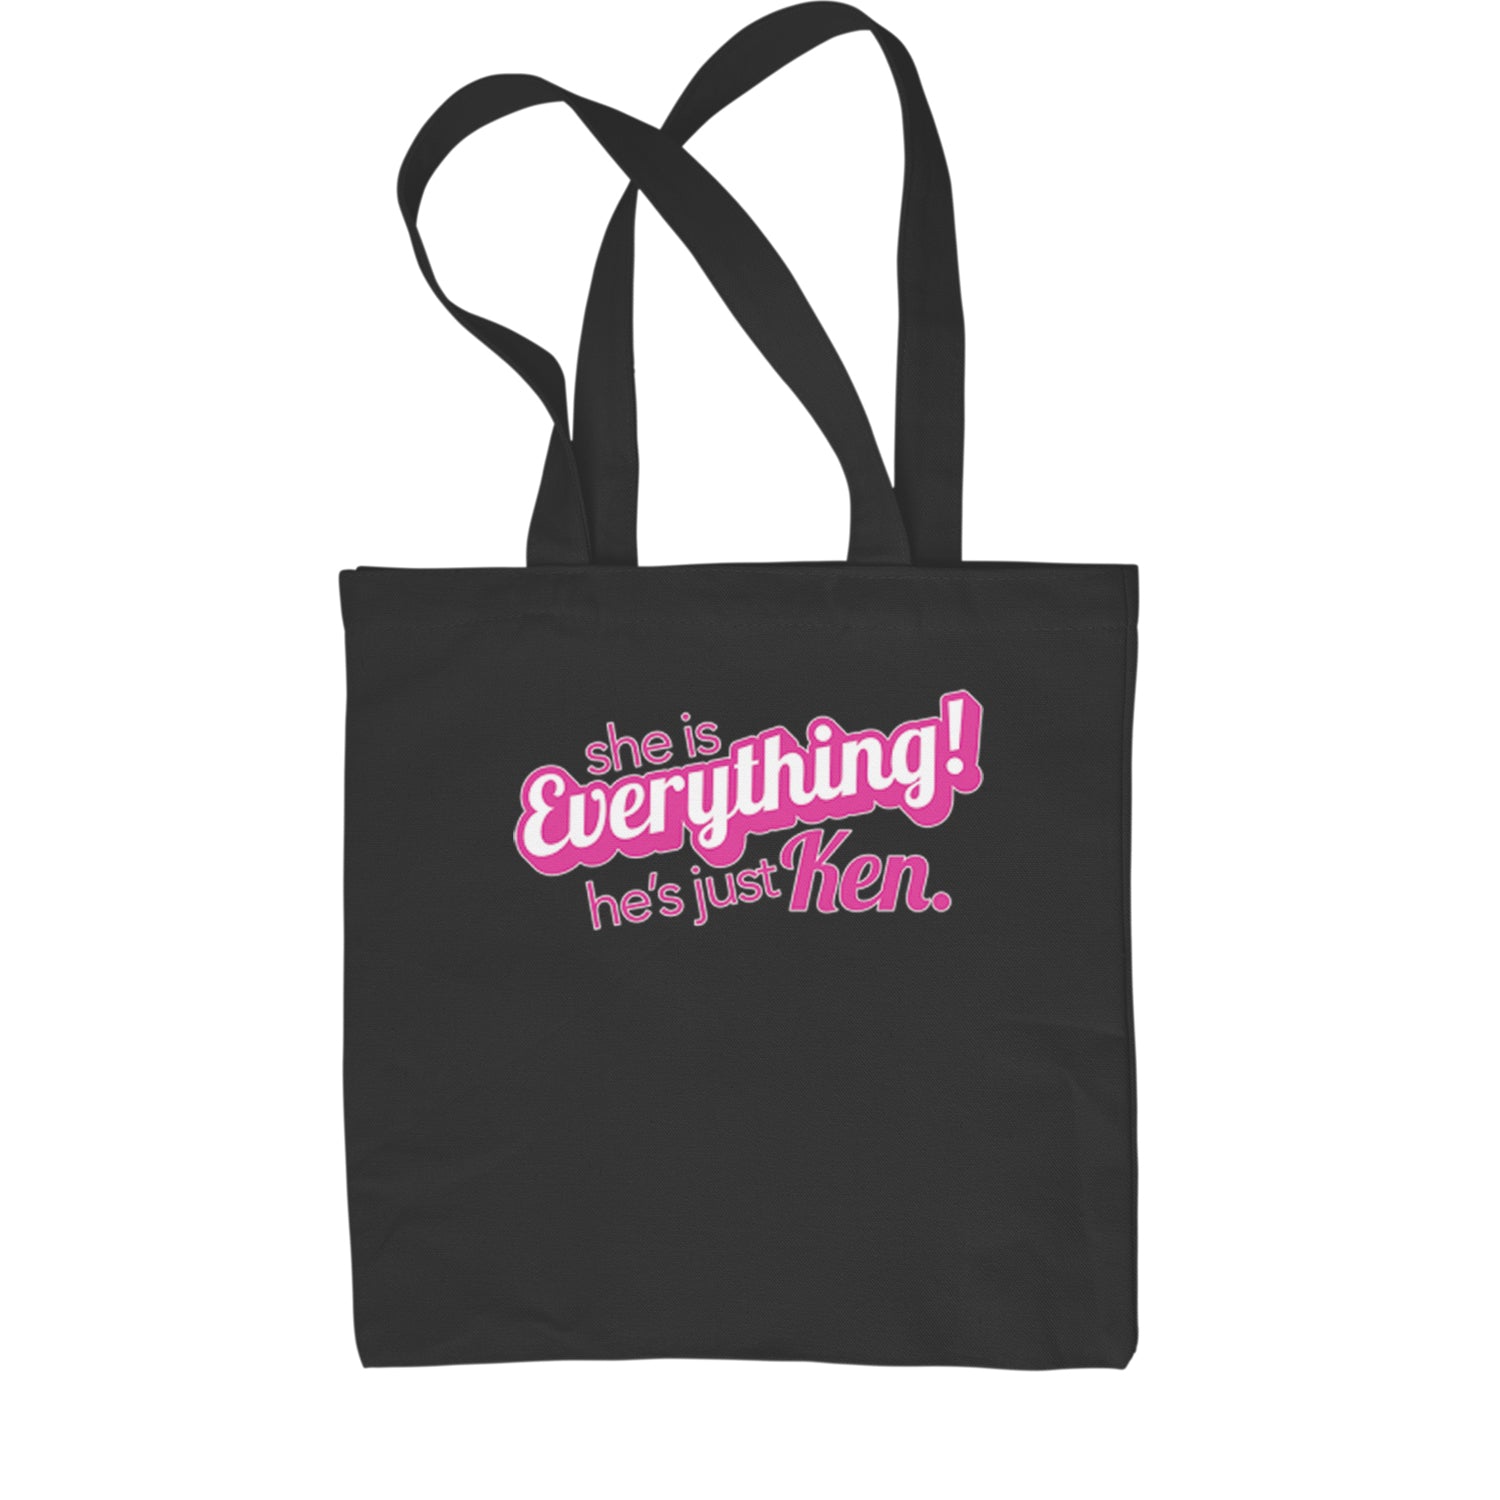 She's Everything, He's Just Ken Shopping Tote Bag